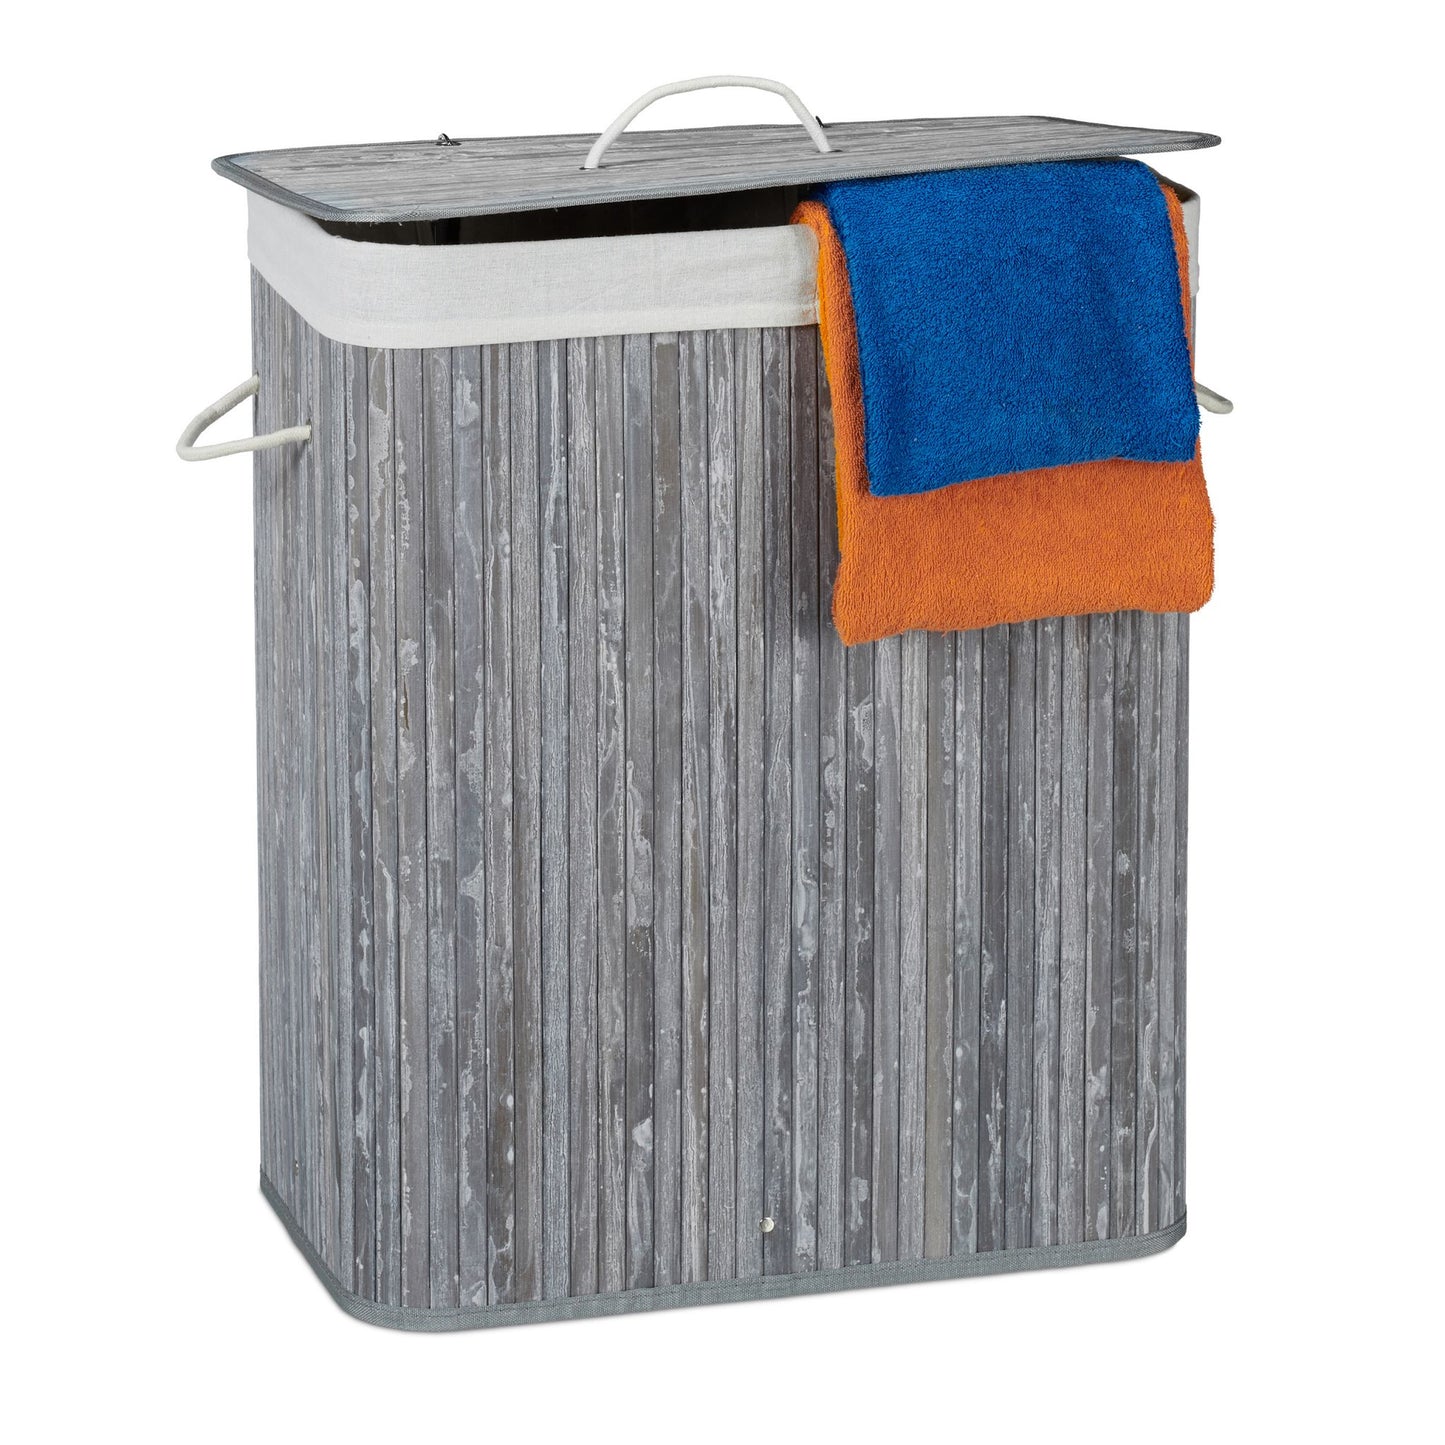 RelaxDays Bamboo Laundry Hamper, 2 Compartments Bamboo Bathrooms